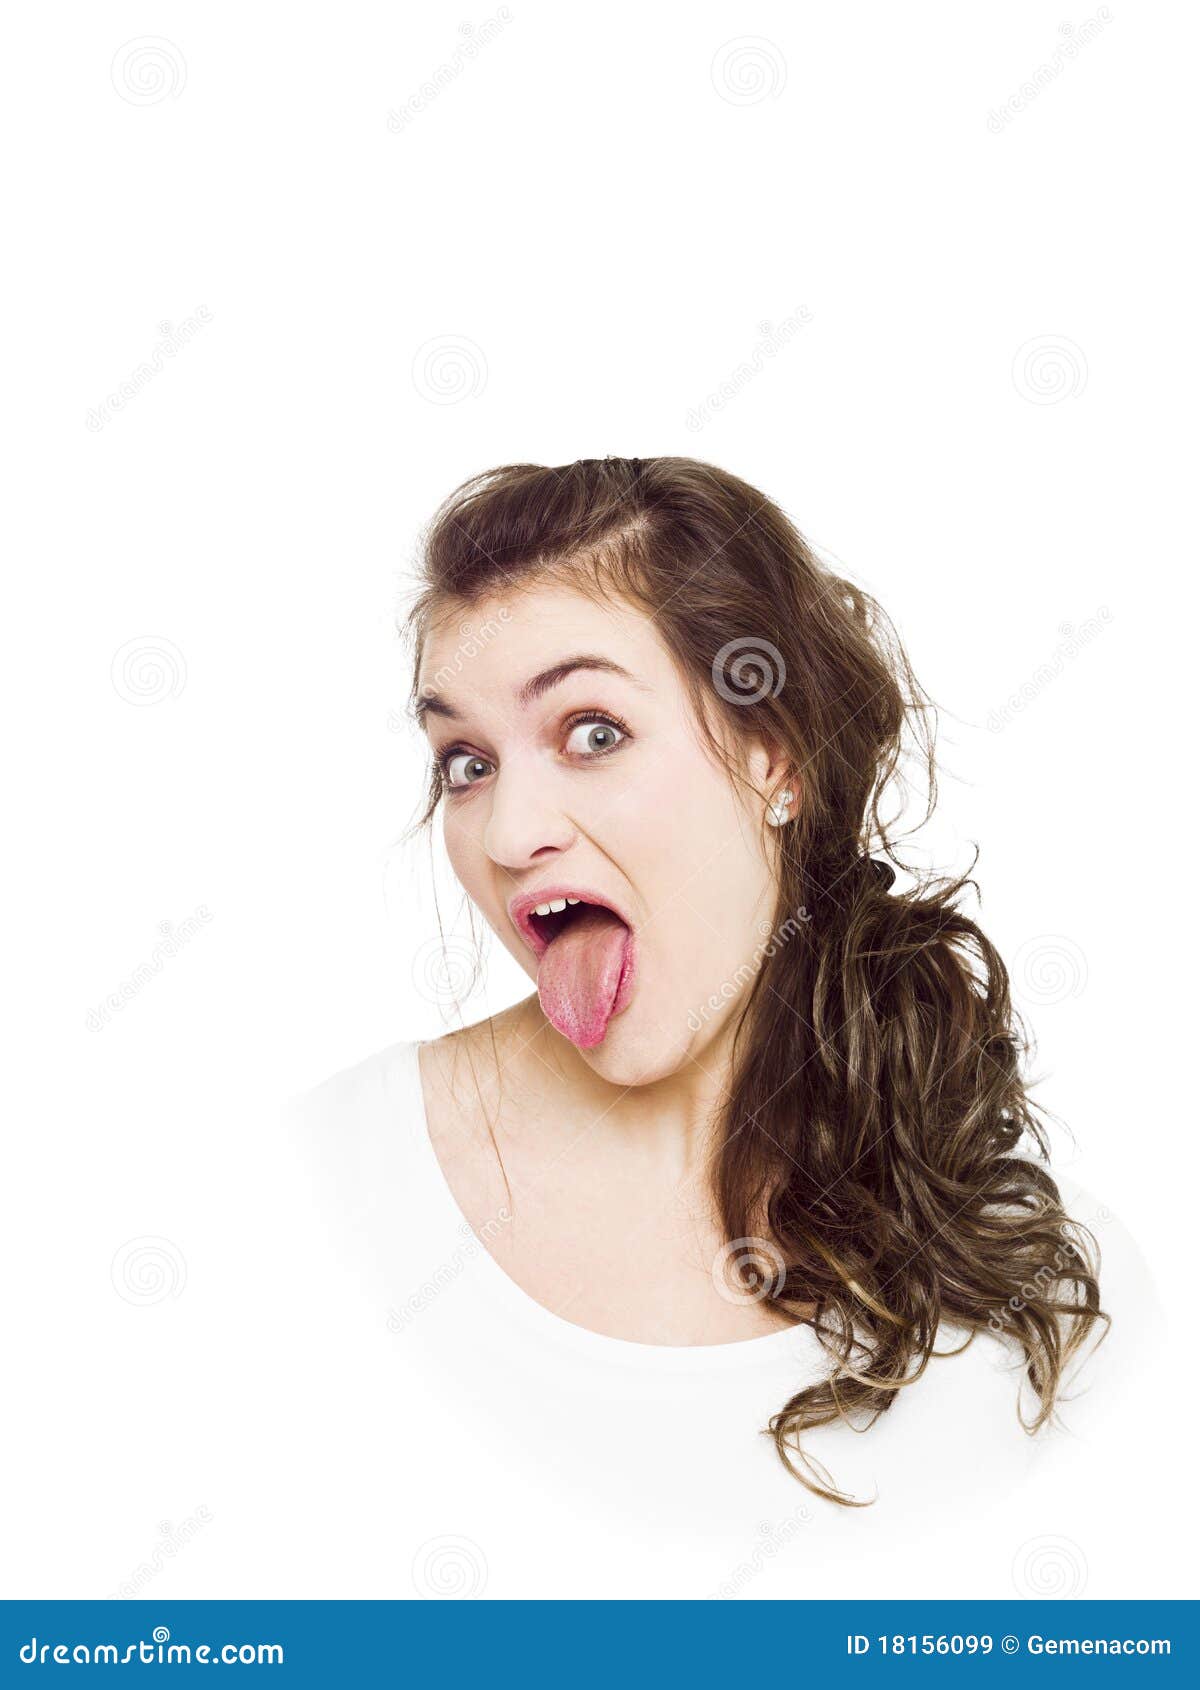 Royalty Free Stock Images: Making a funny face